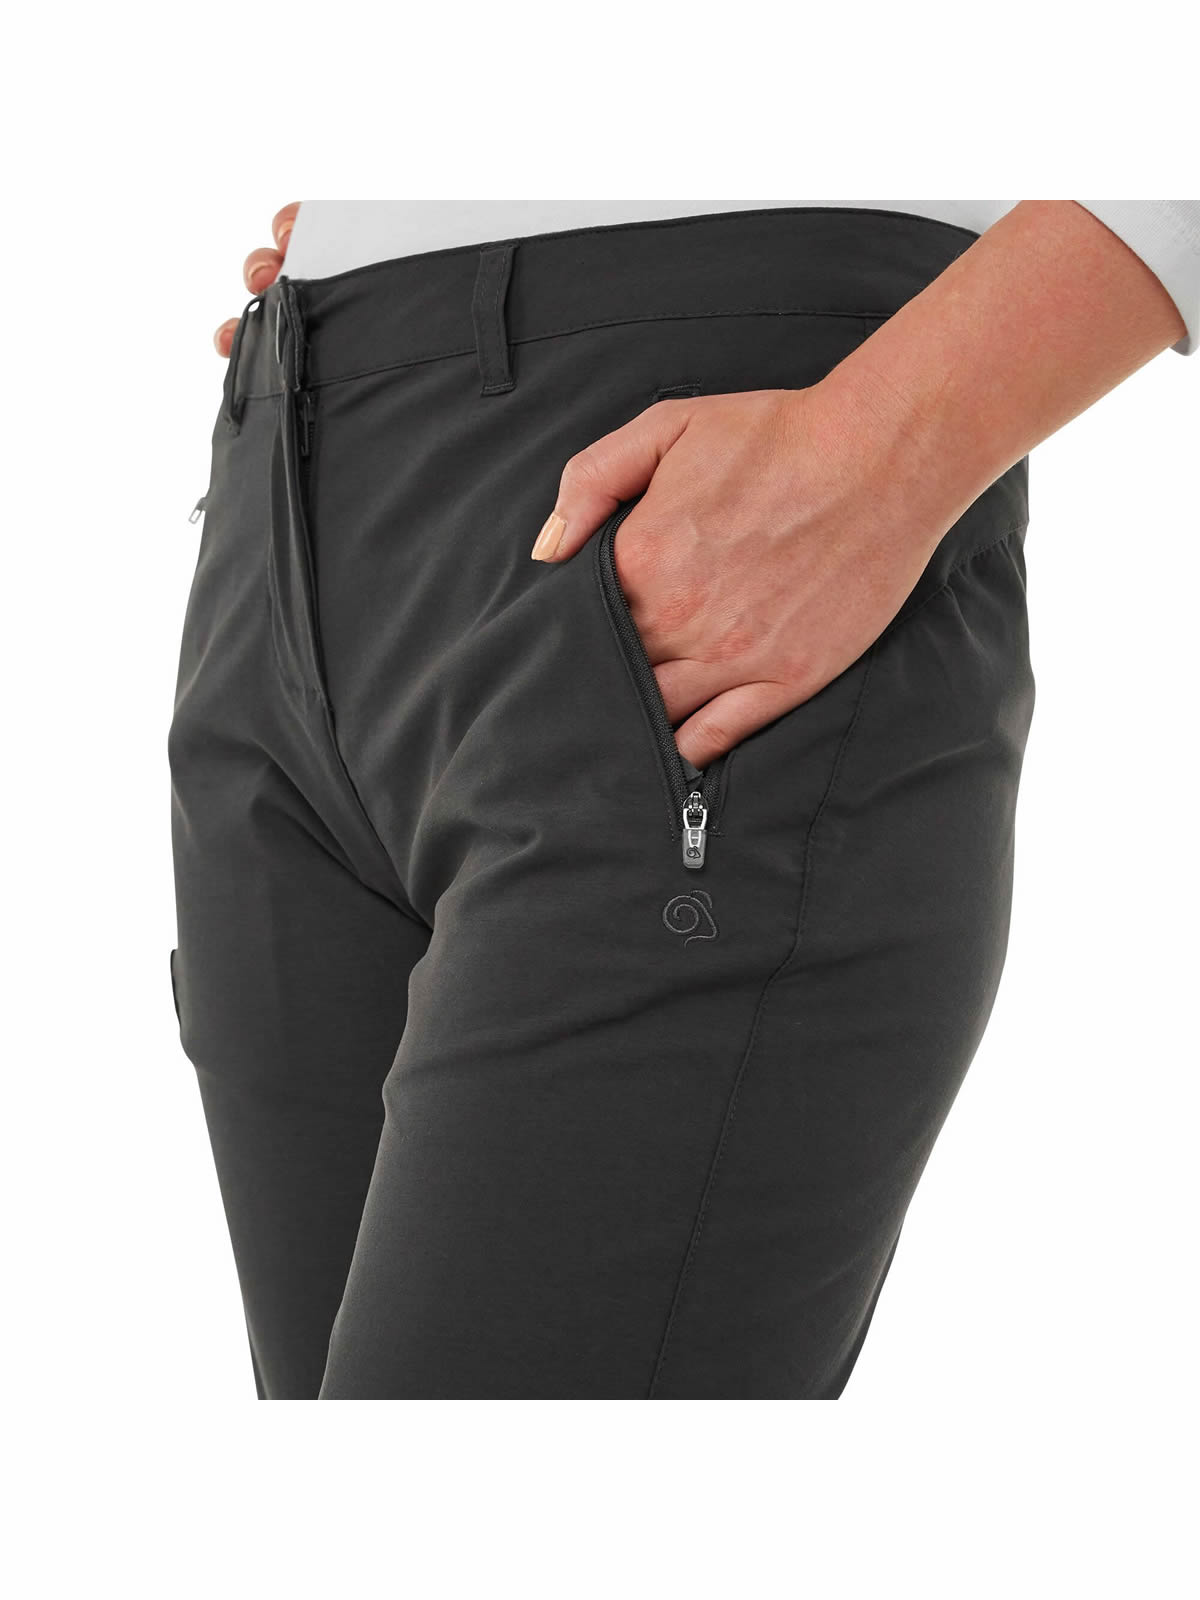 Womens Kiwi Pro II Winter Lined Trousers  Graphite  Craghoppers UK